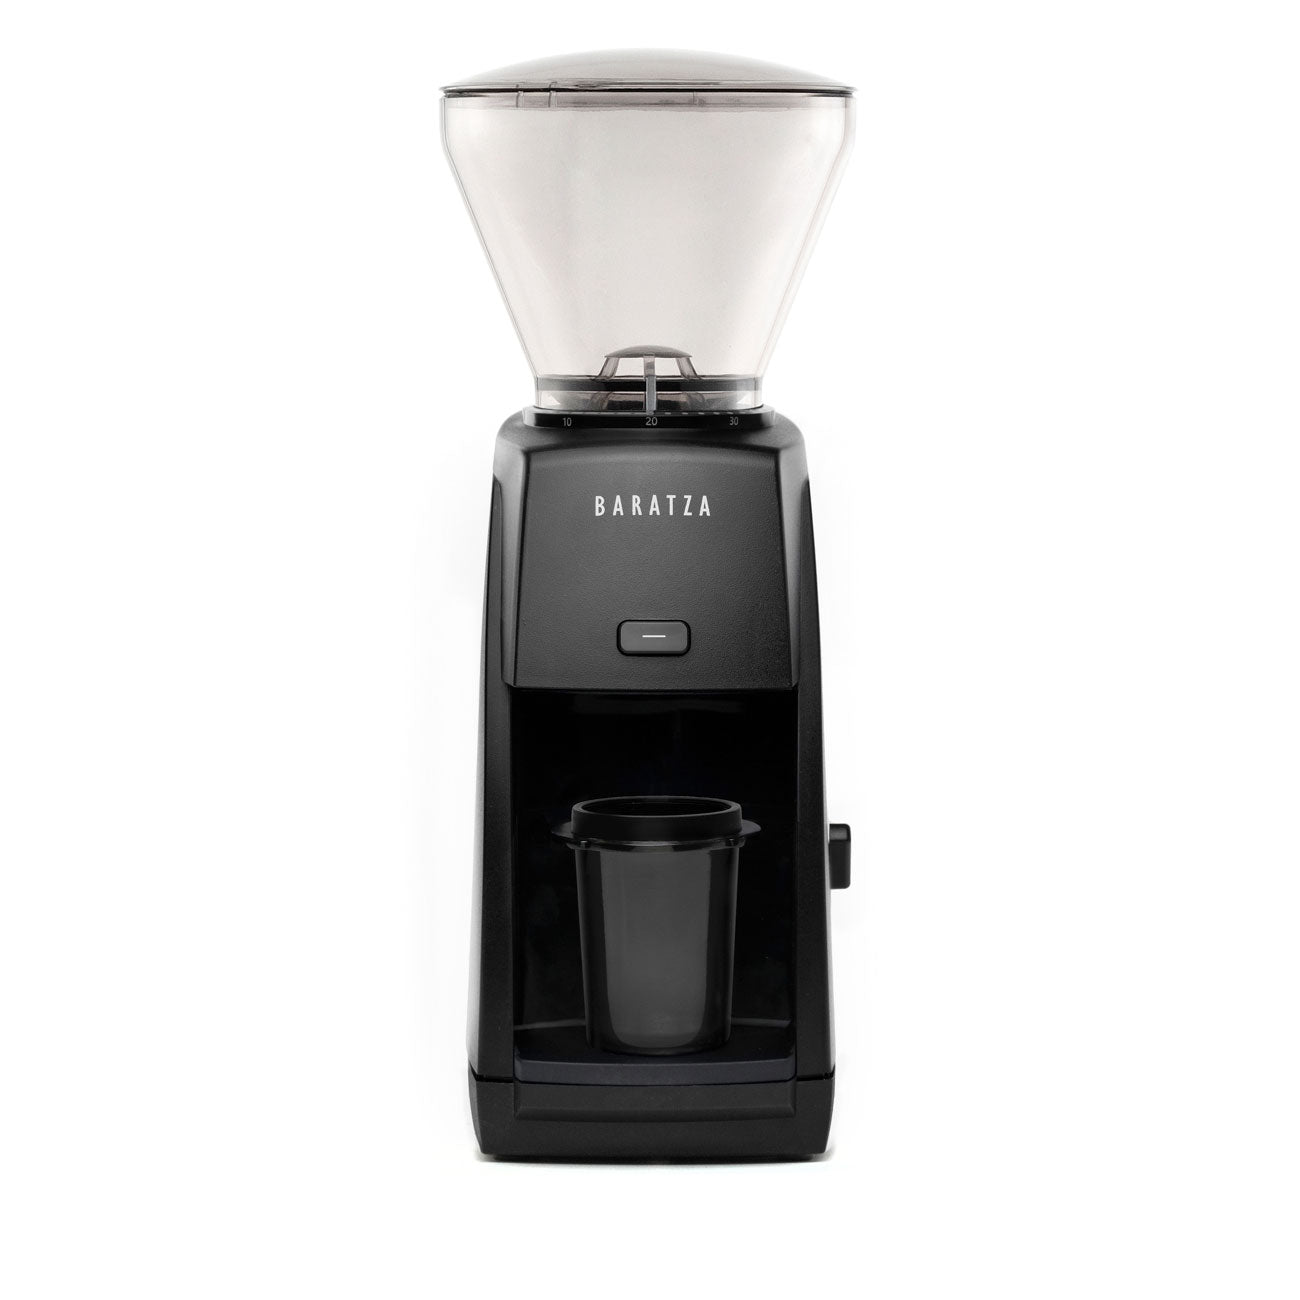 New Electric Coffee Grinder Commercial Automatic Grinder 10-speed